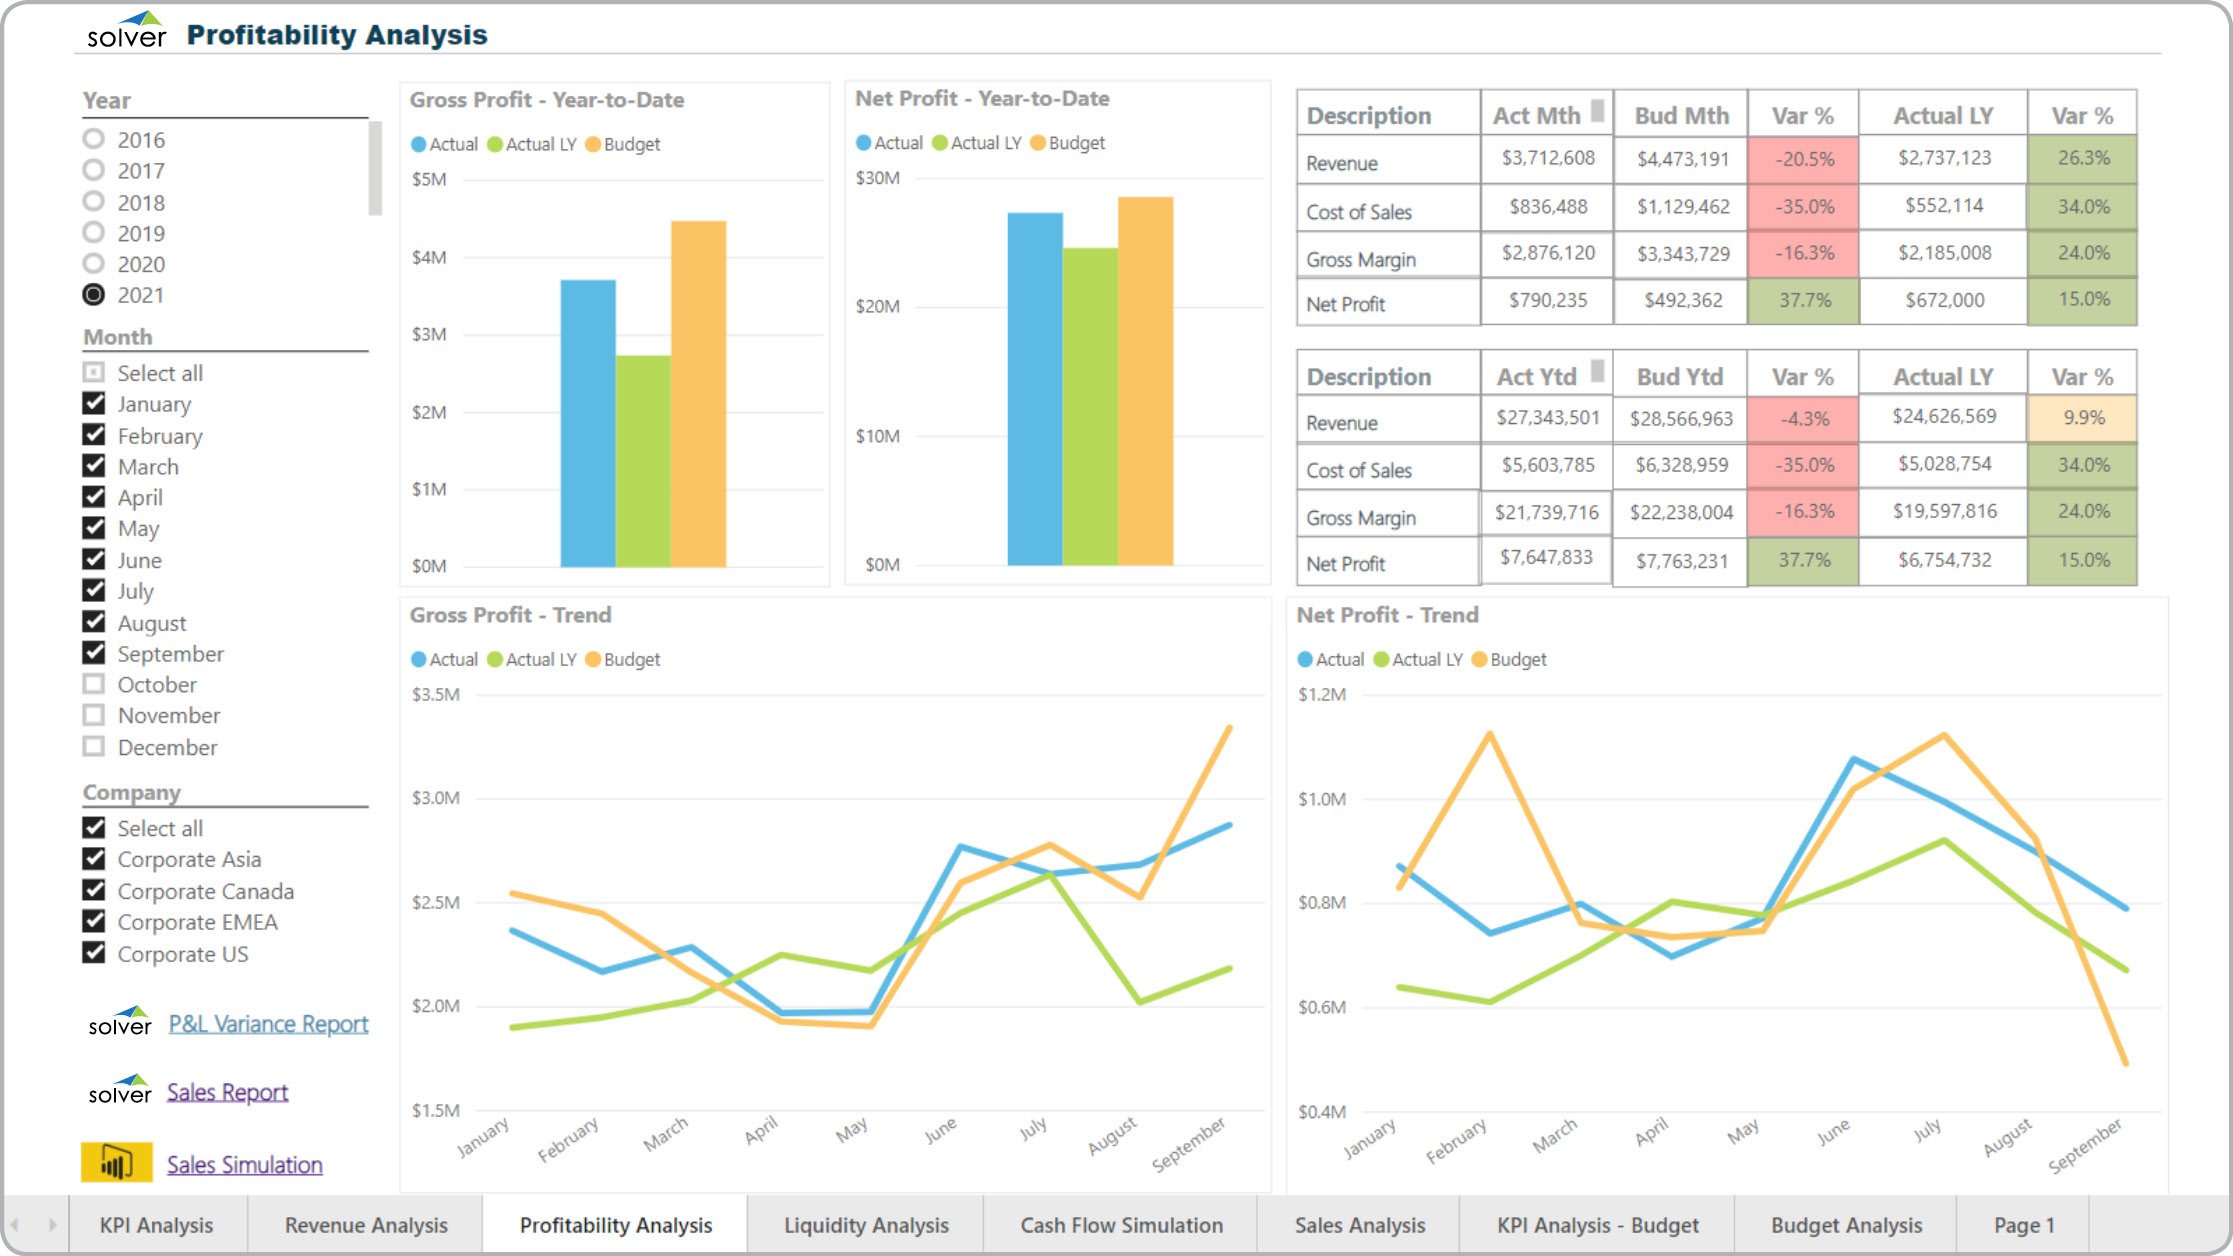 Power BI dashboard with focus on profitability and related trends and variances.